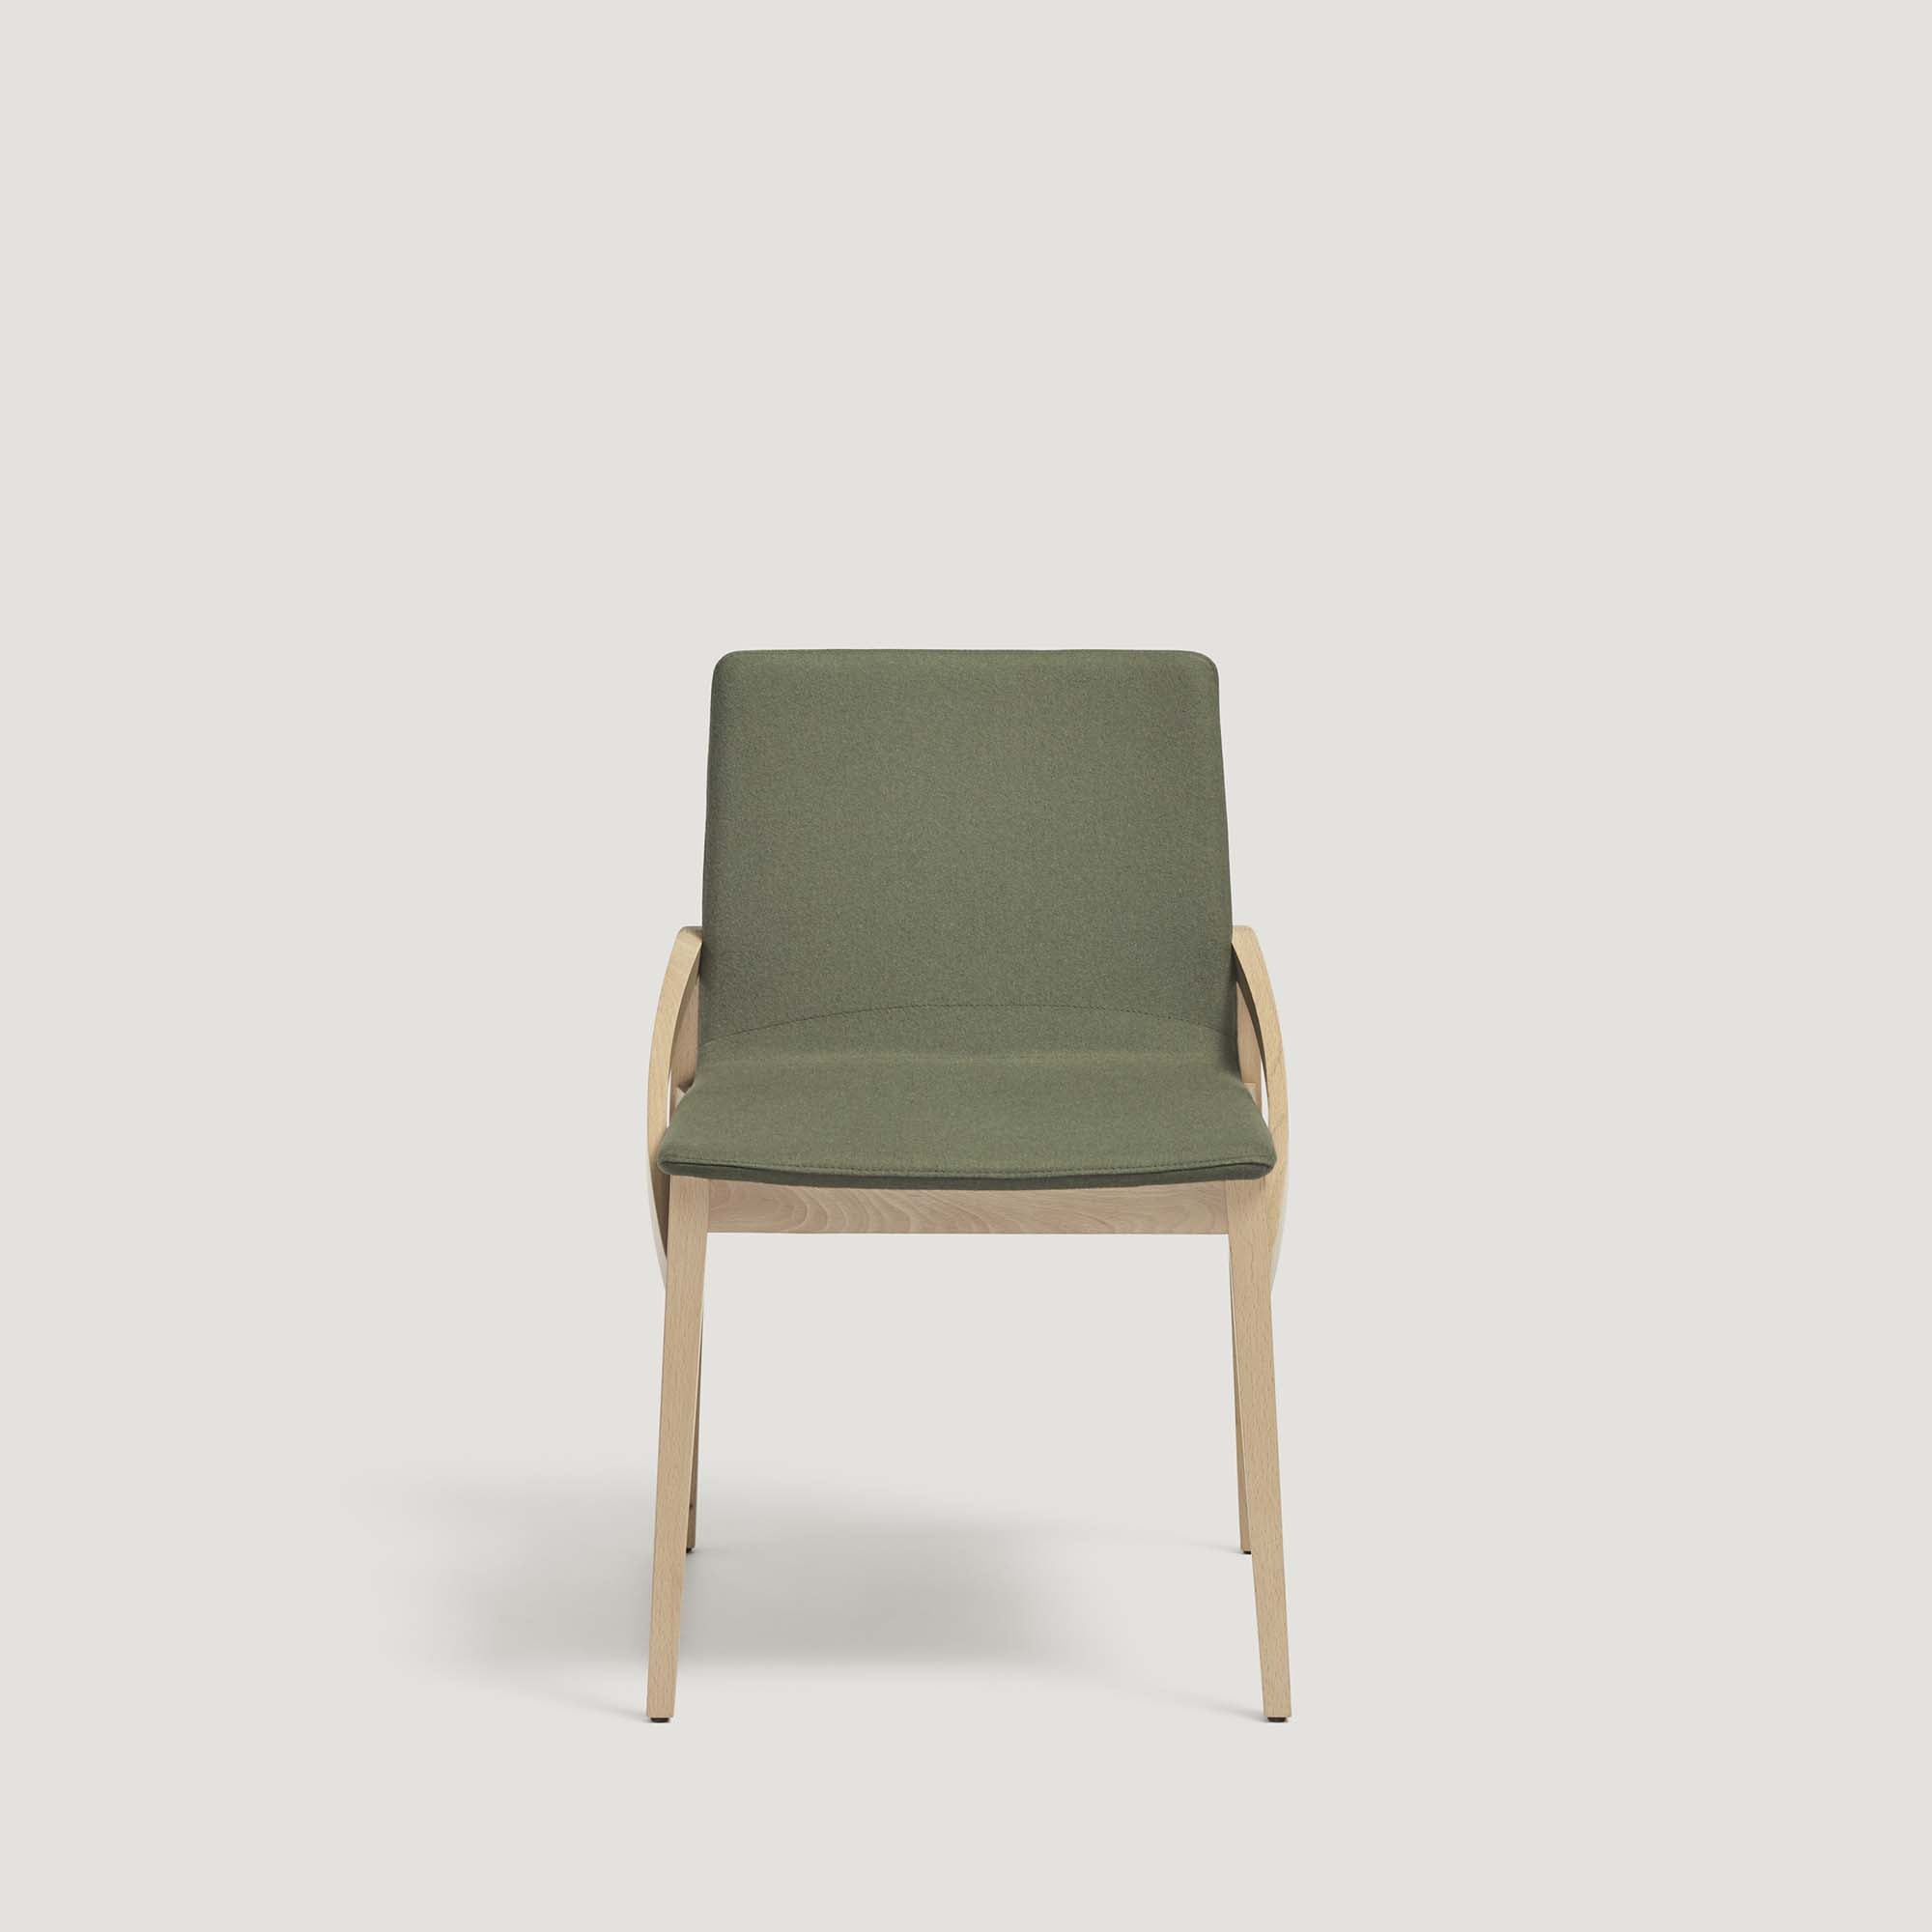 CAPITA Chair beech wood, green fabric upholstery, front view